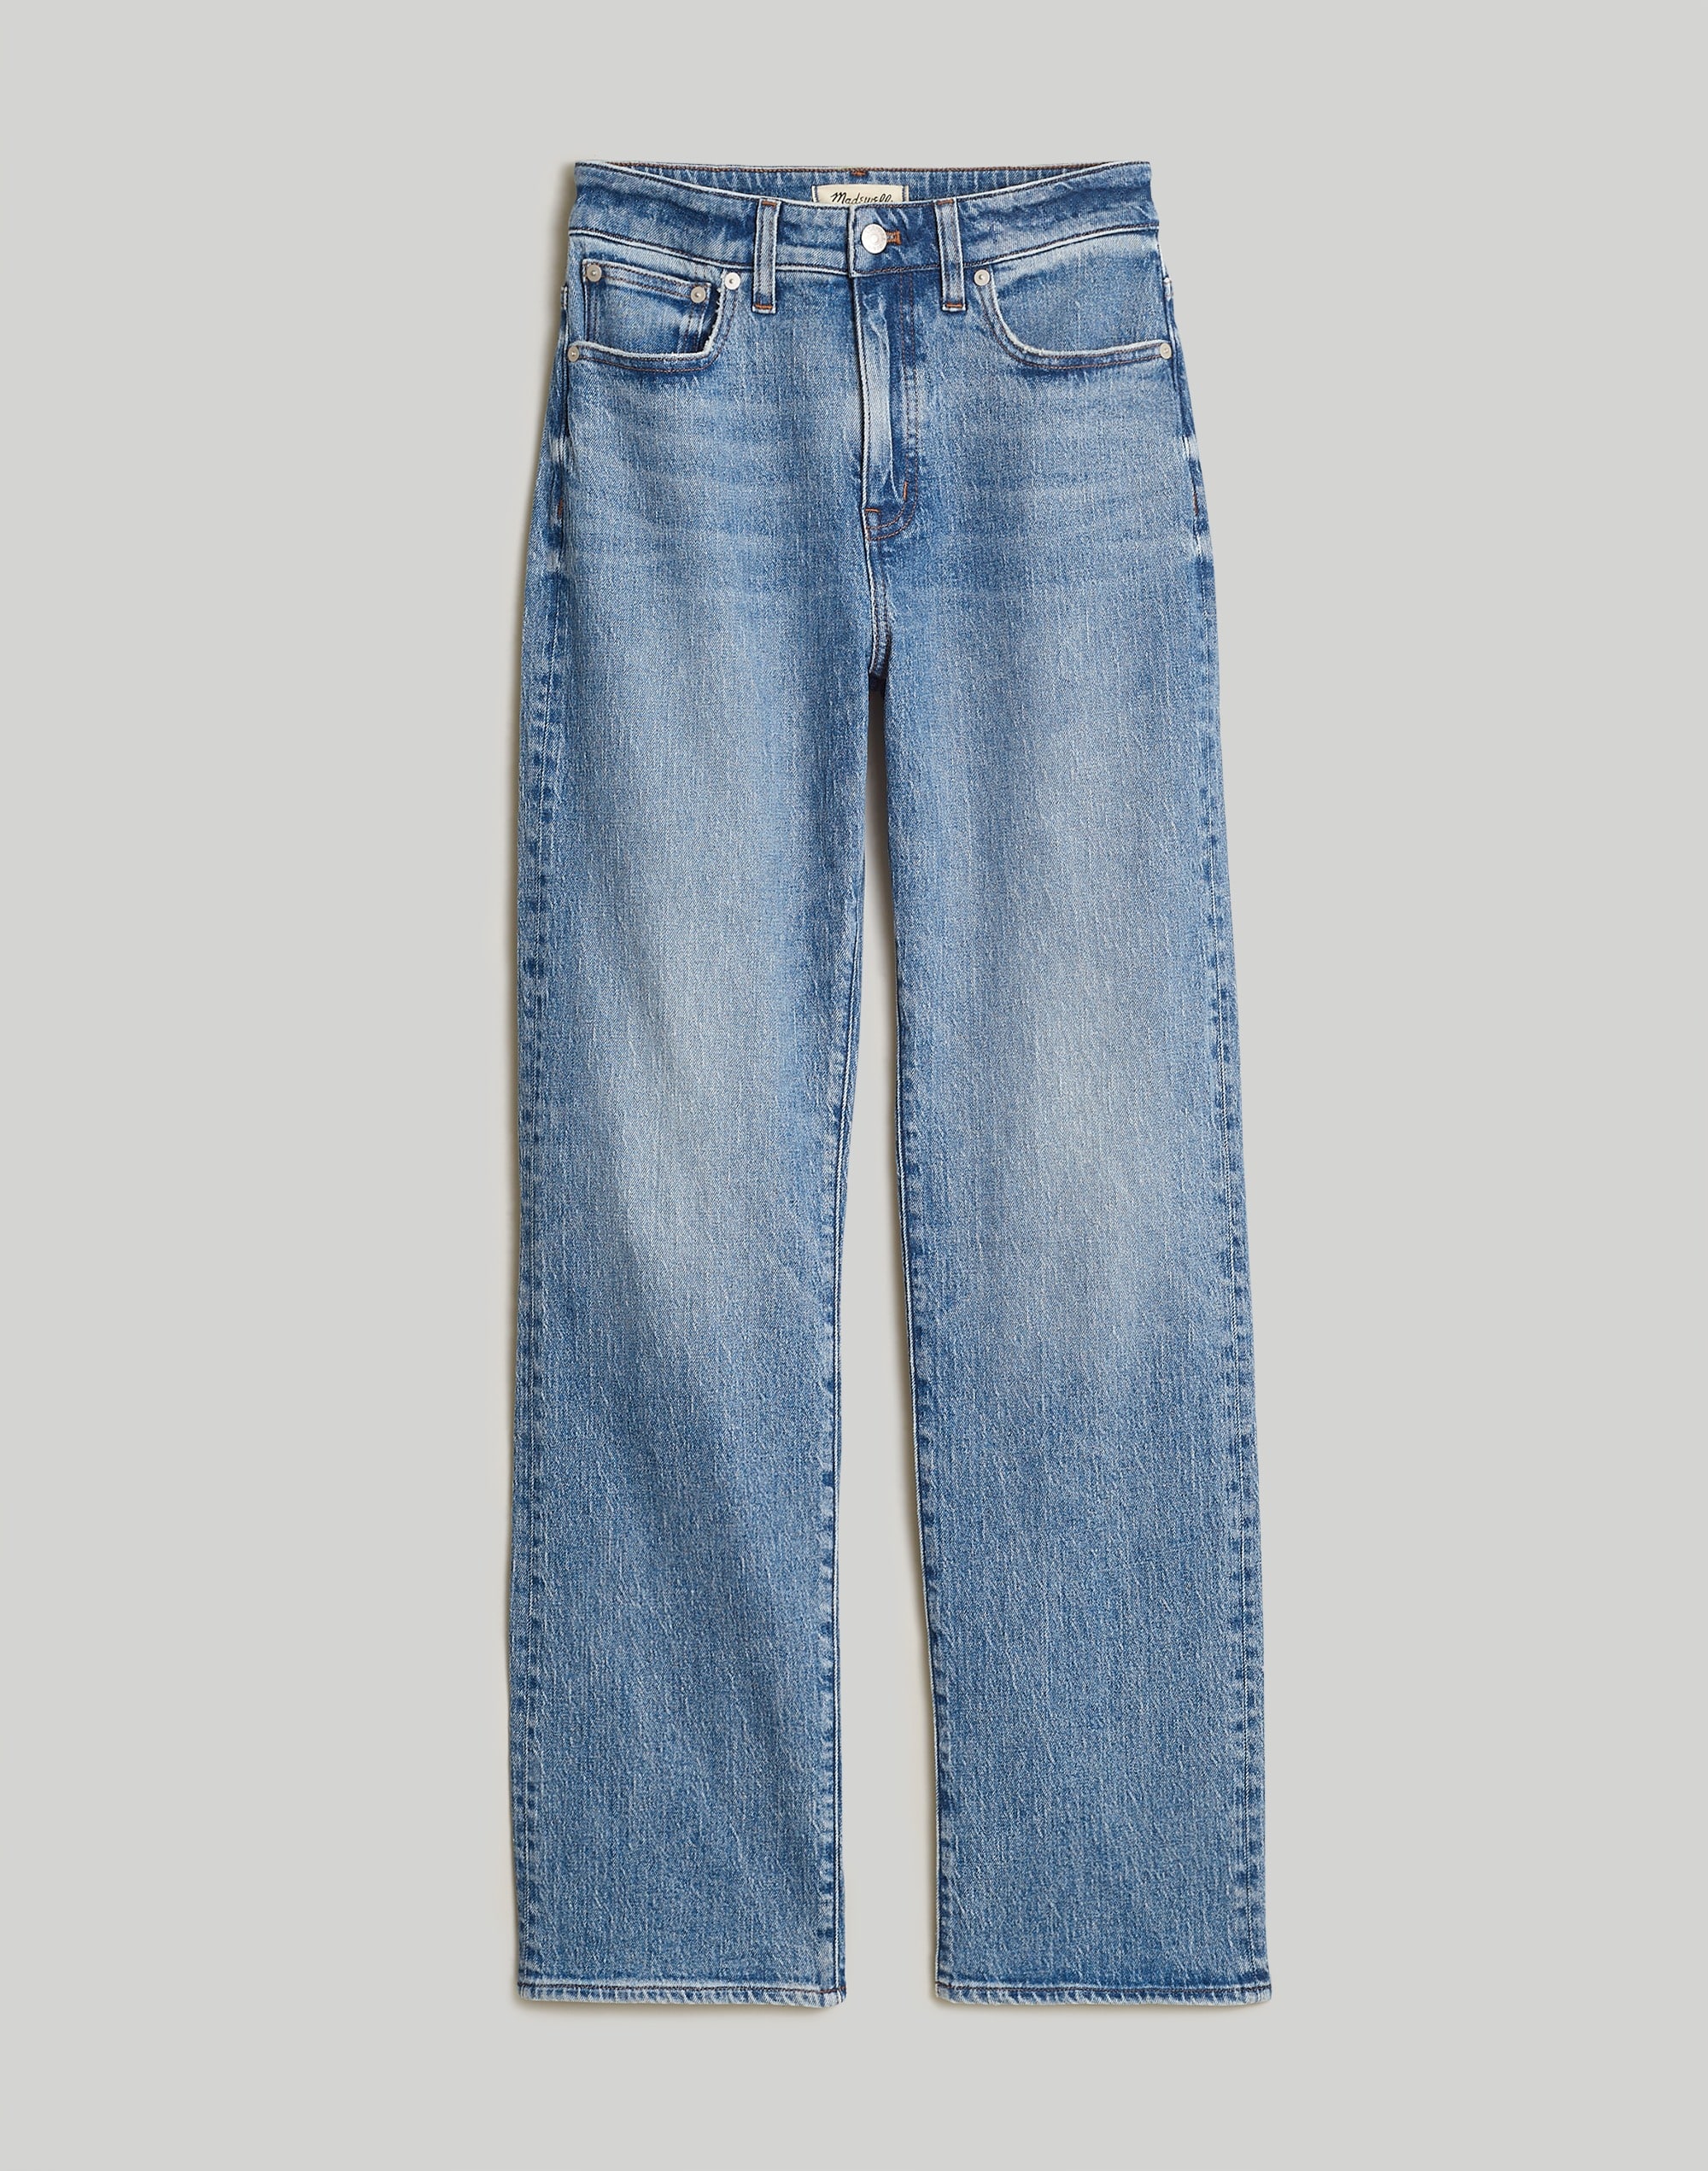 The Curvy '90s Straight Jean Enmore Wash